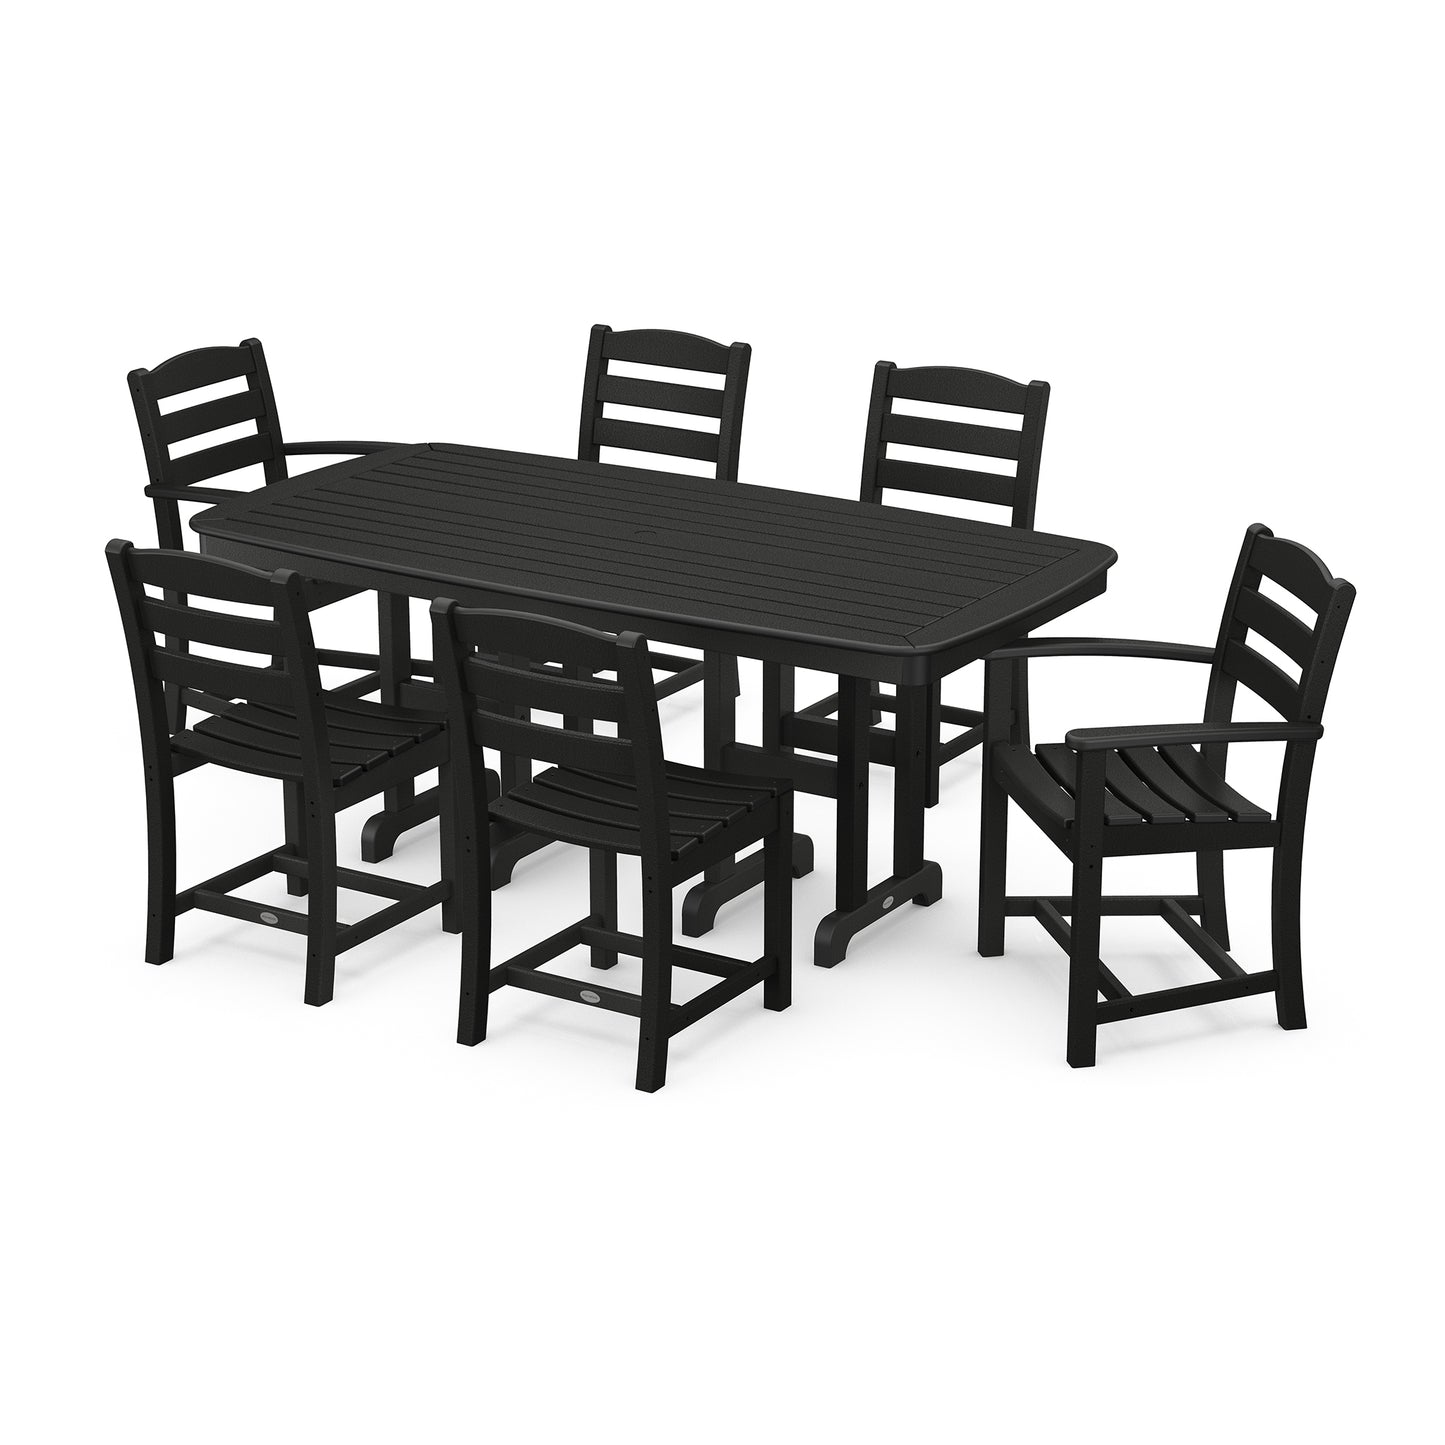 A black POLYWOOD® La Casa Cafe 7-Piece Dining Set featuring a rectangular table and six matching chairs with a slatted design, isolated on a white background.